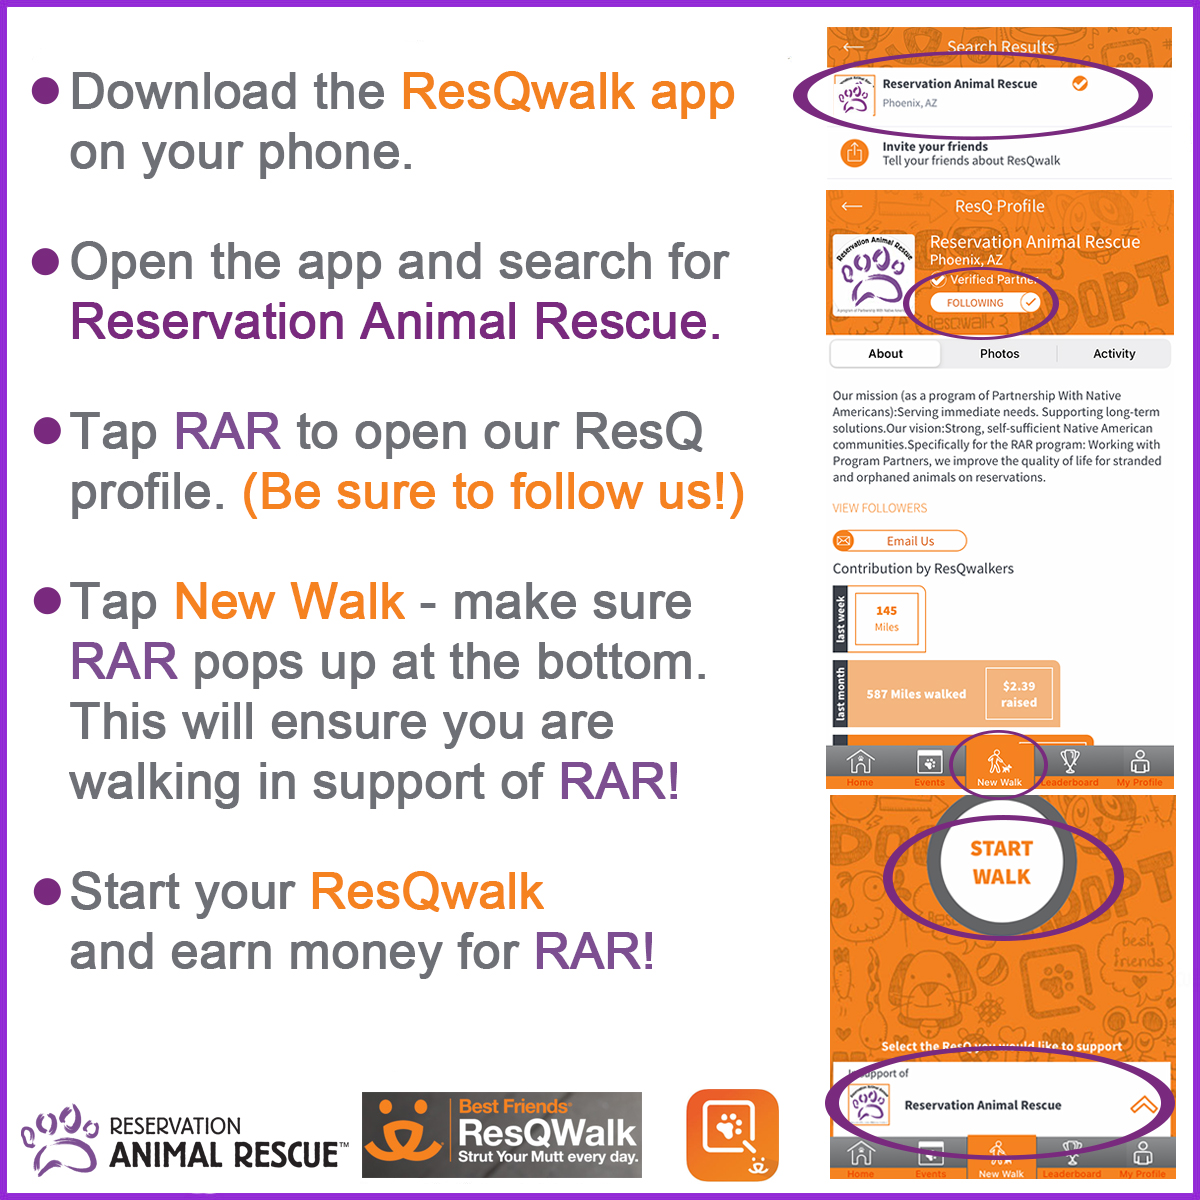 How-to instructions for the ResQwalk app